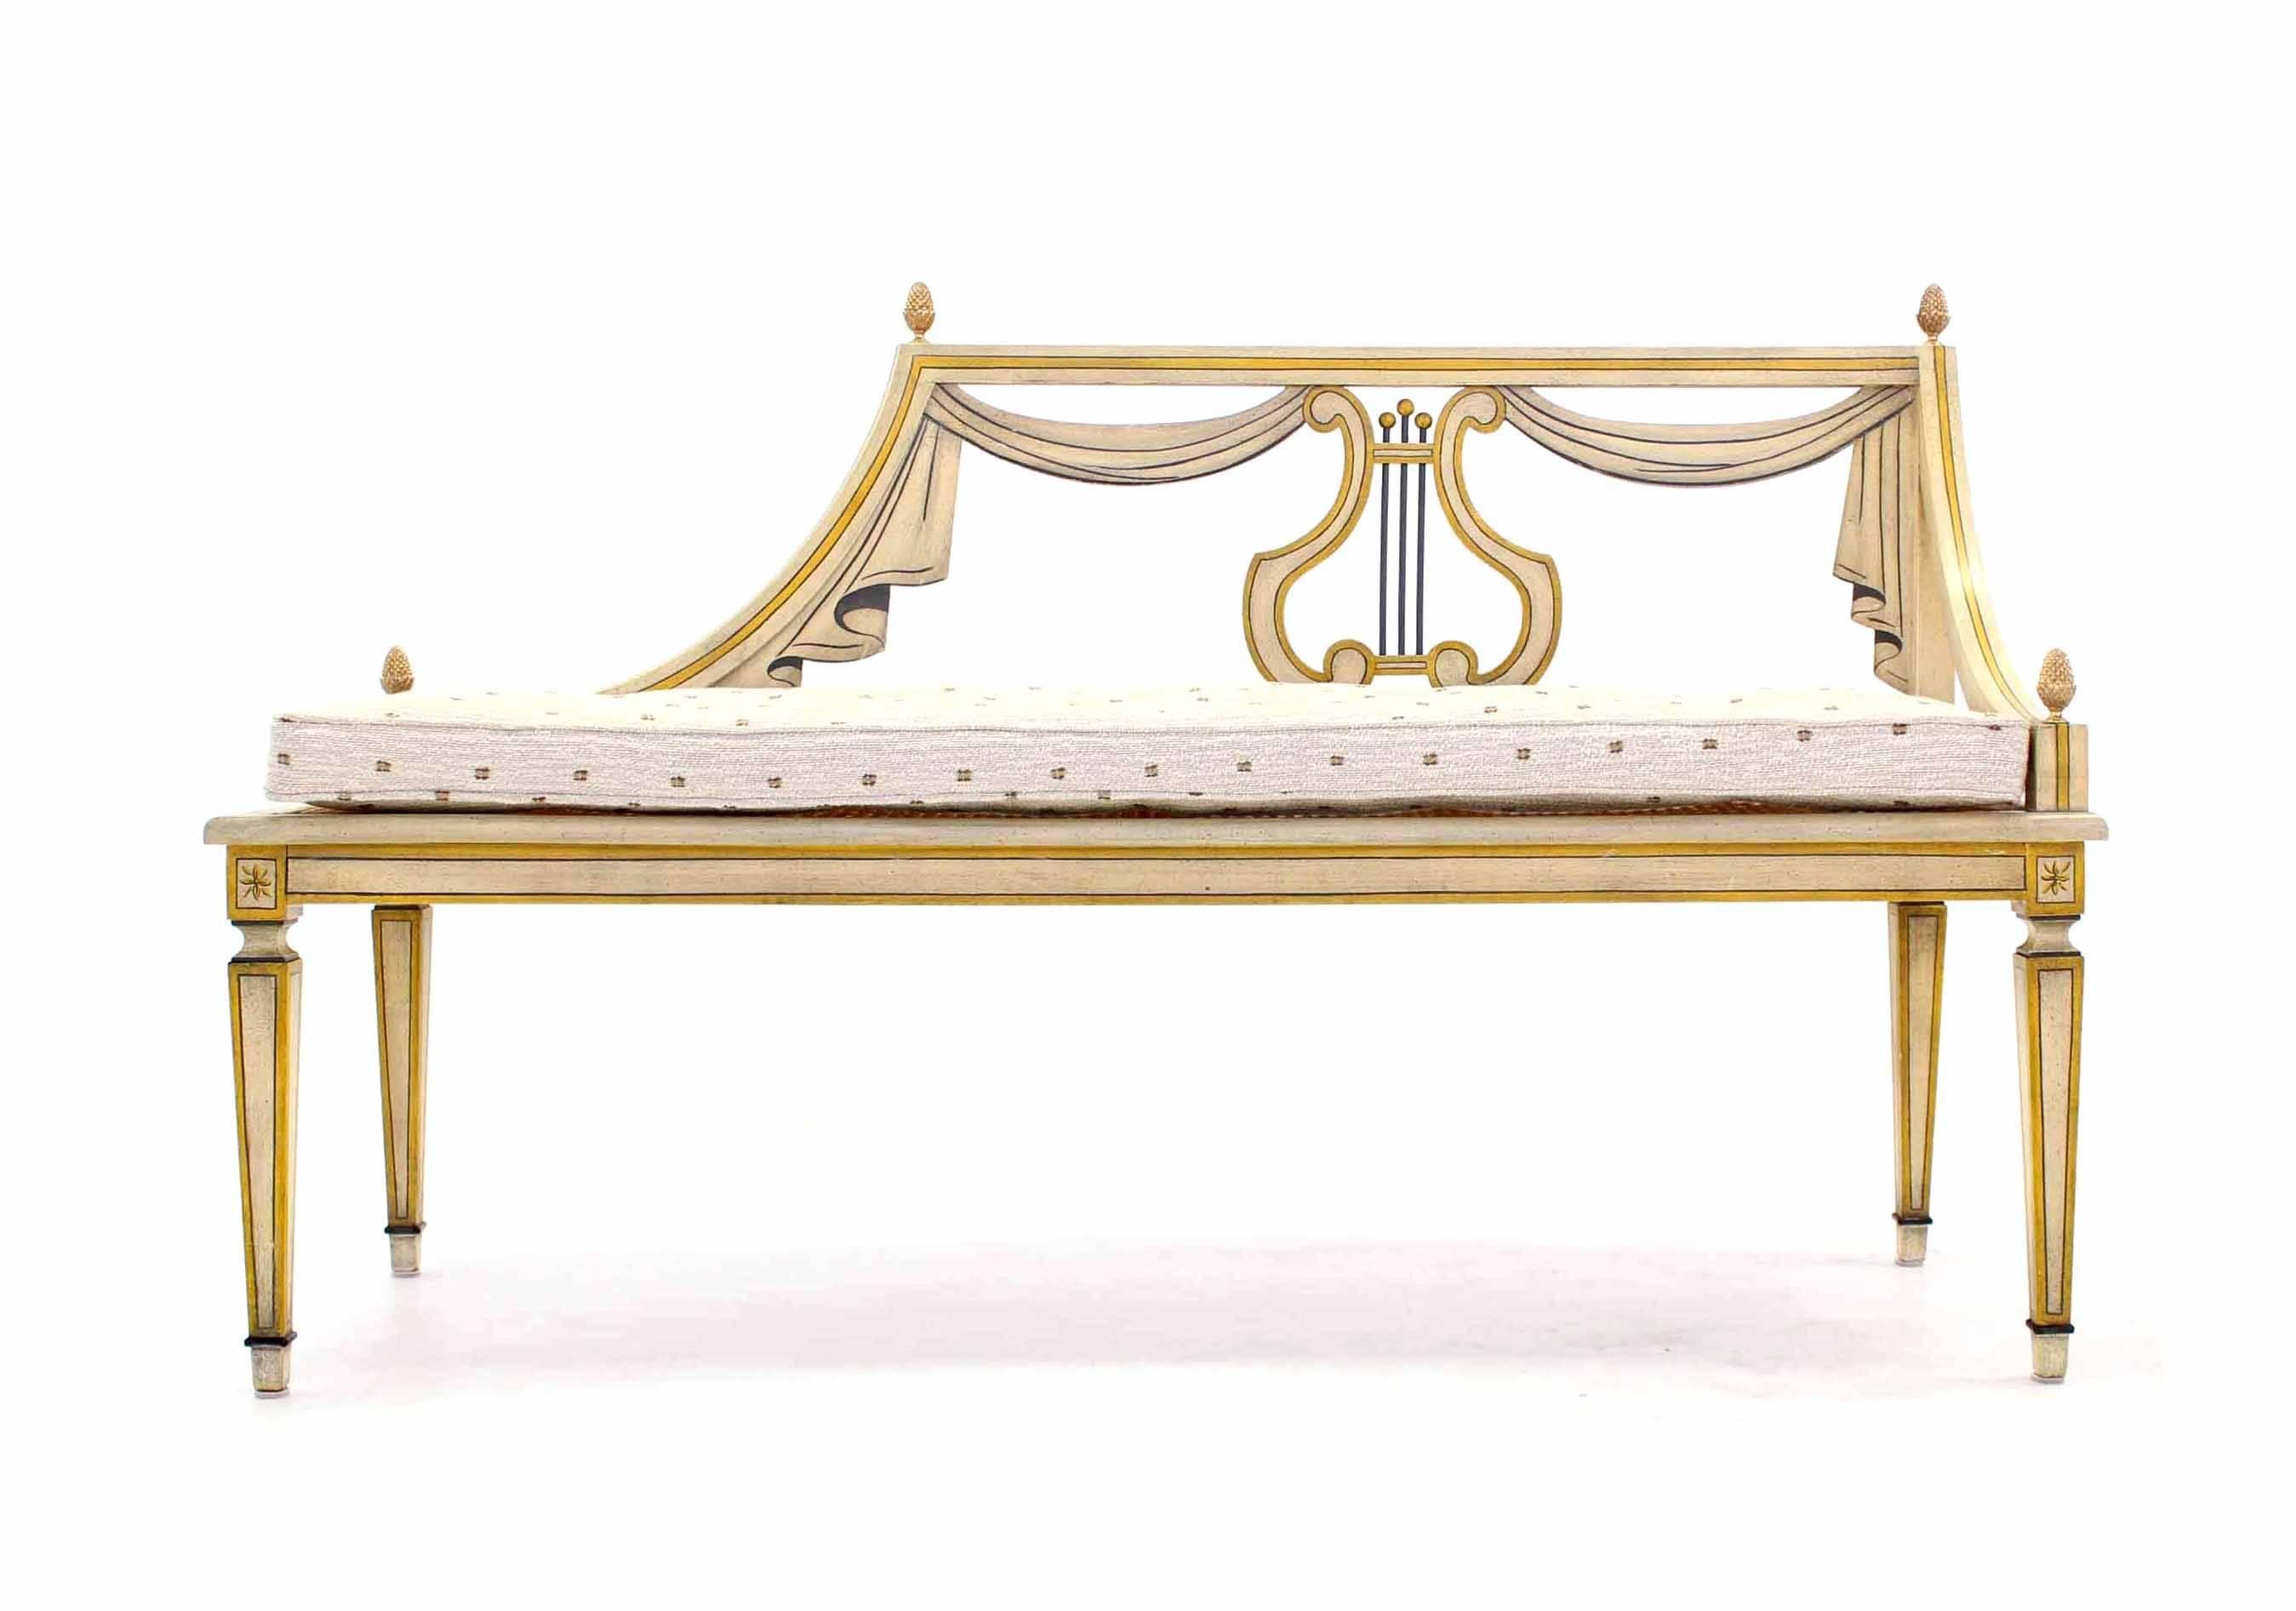 Painted French Provincial Style Curved Bench Recamier New Upholstery For Sale